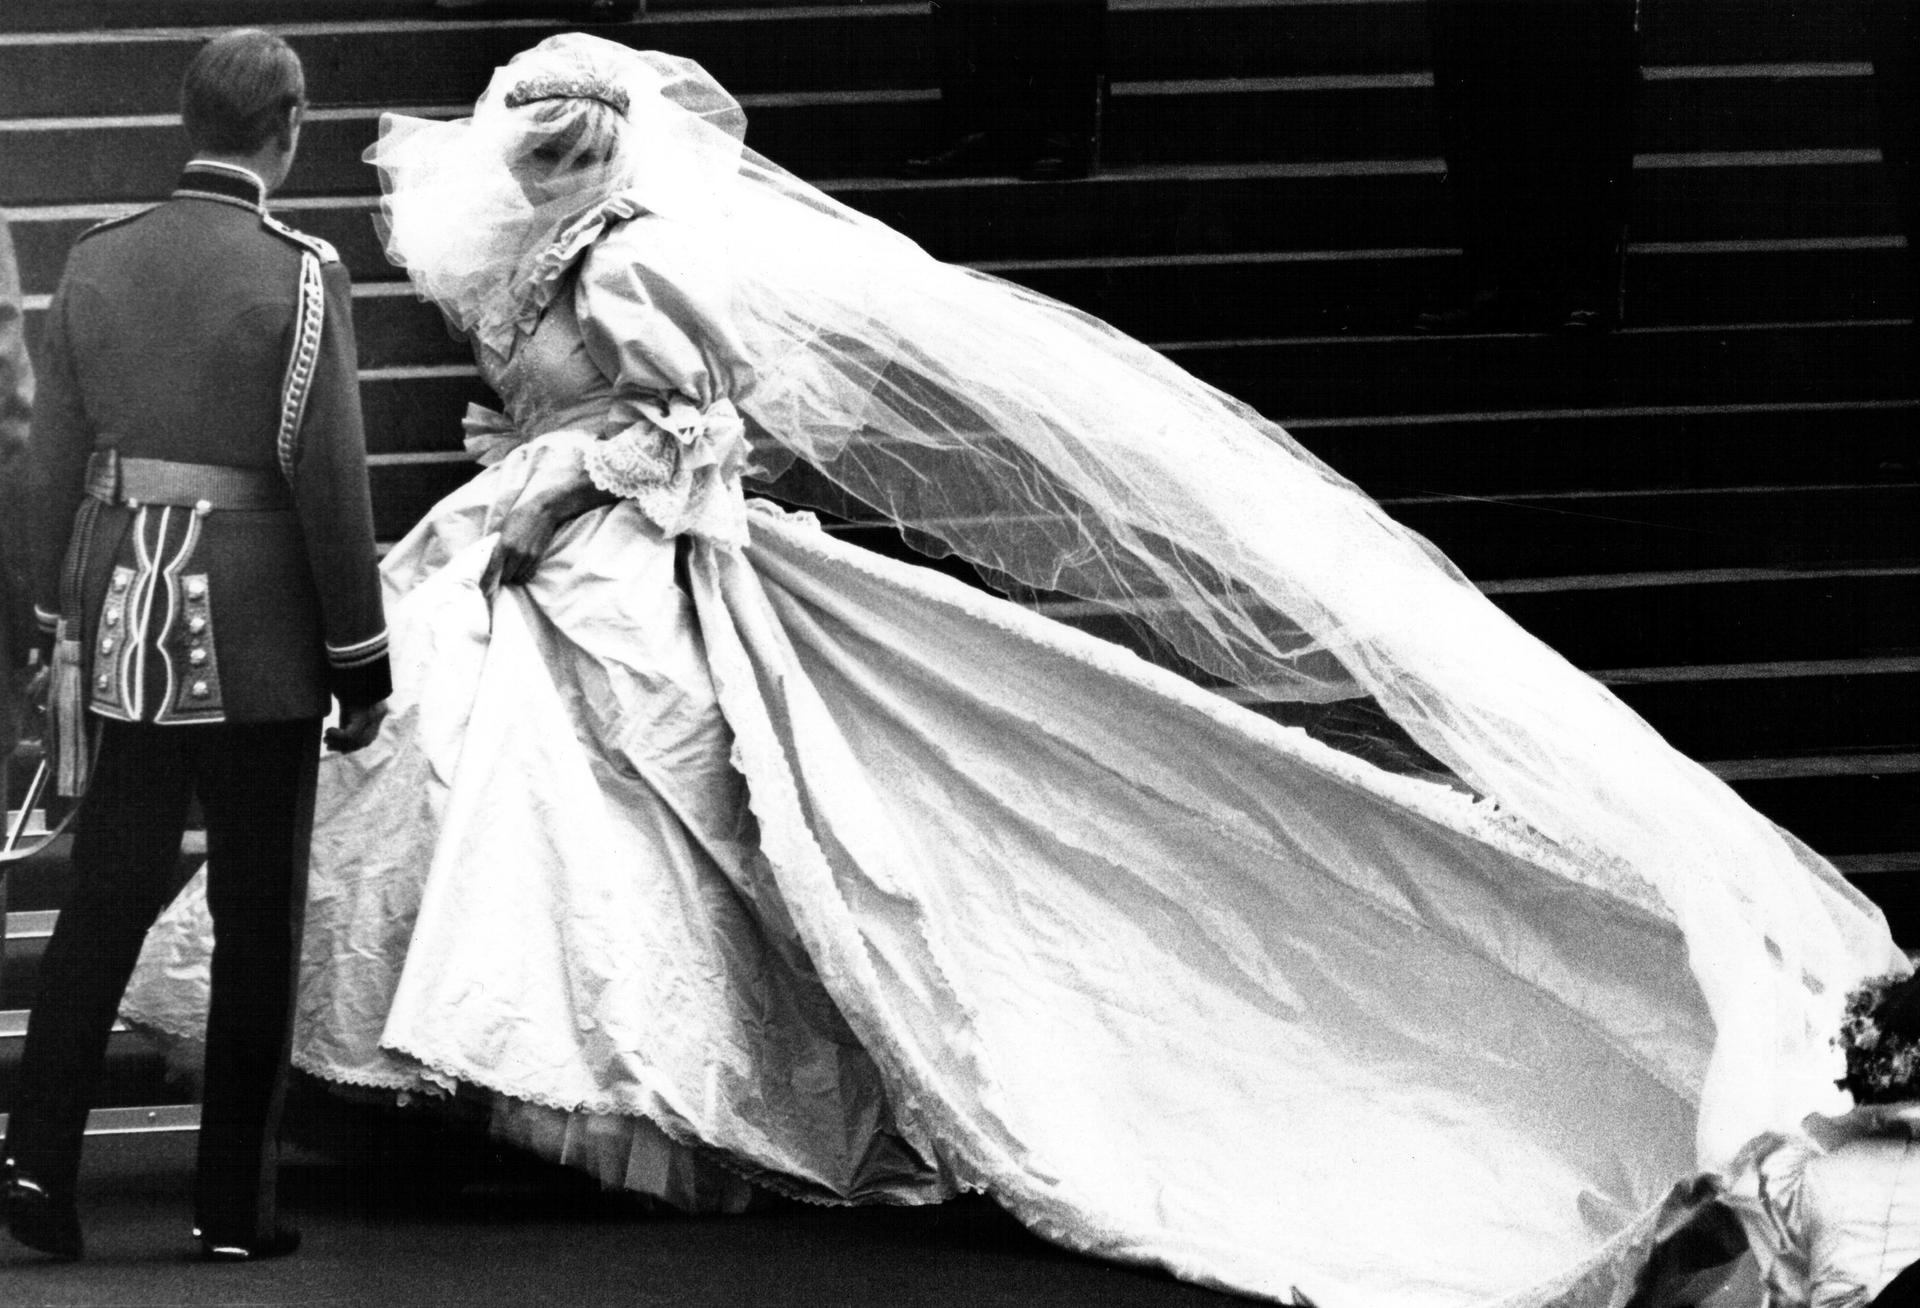 Lady Diana Spencer in her wedding gown before her wedding in London, July 29, 1981.